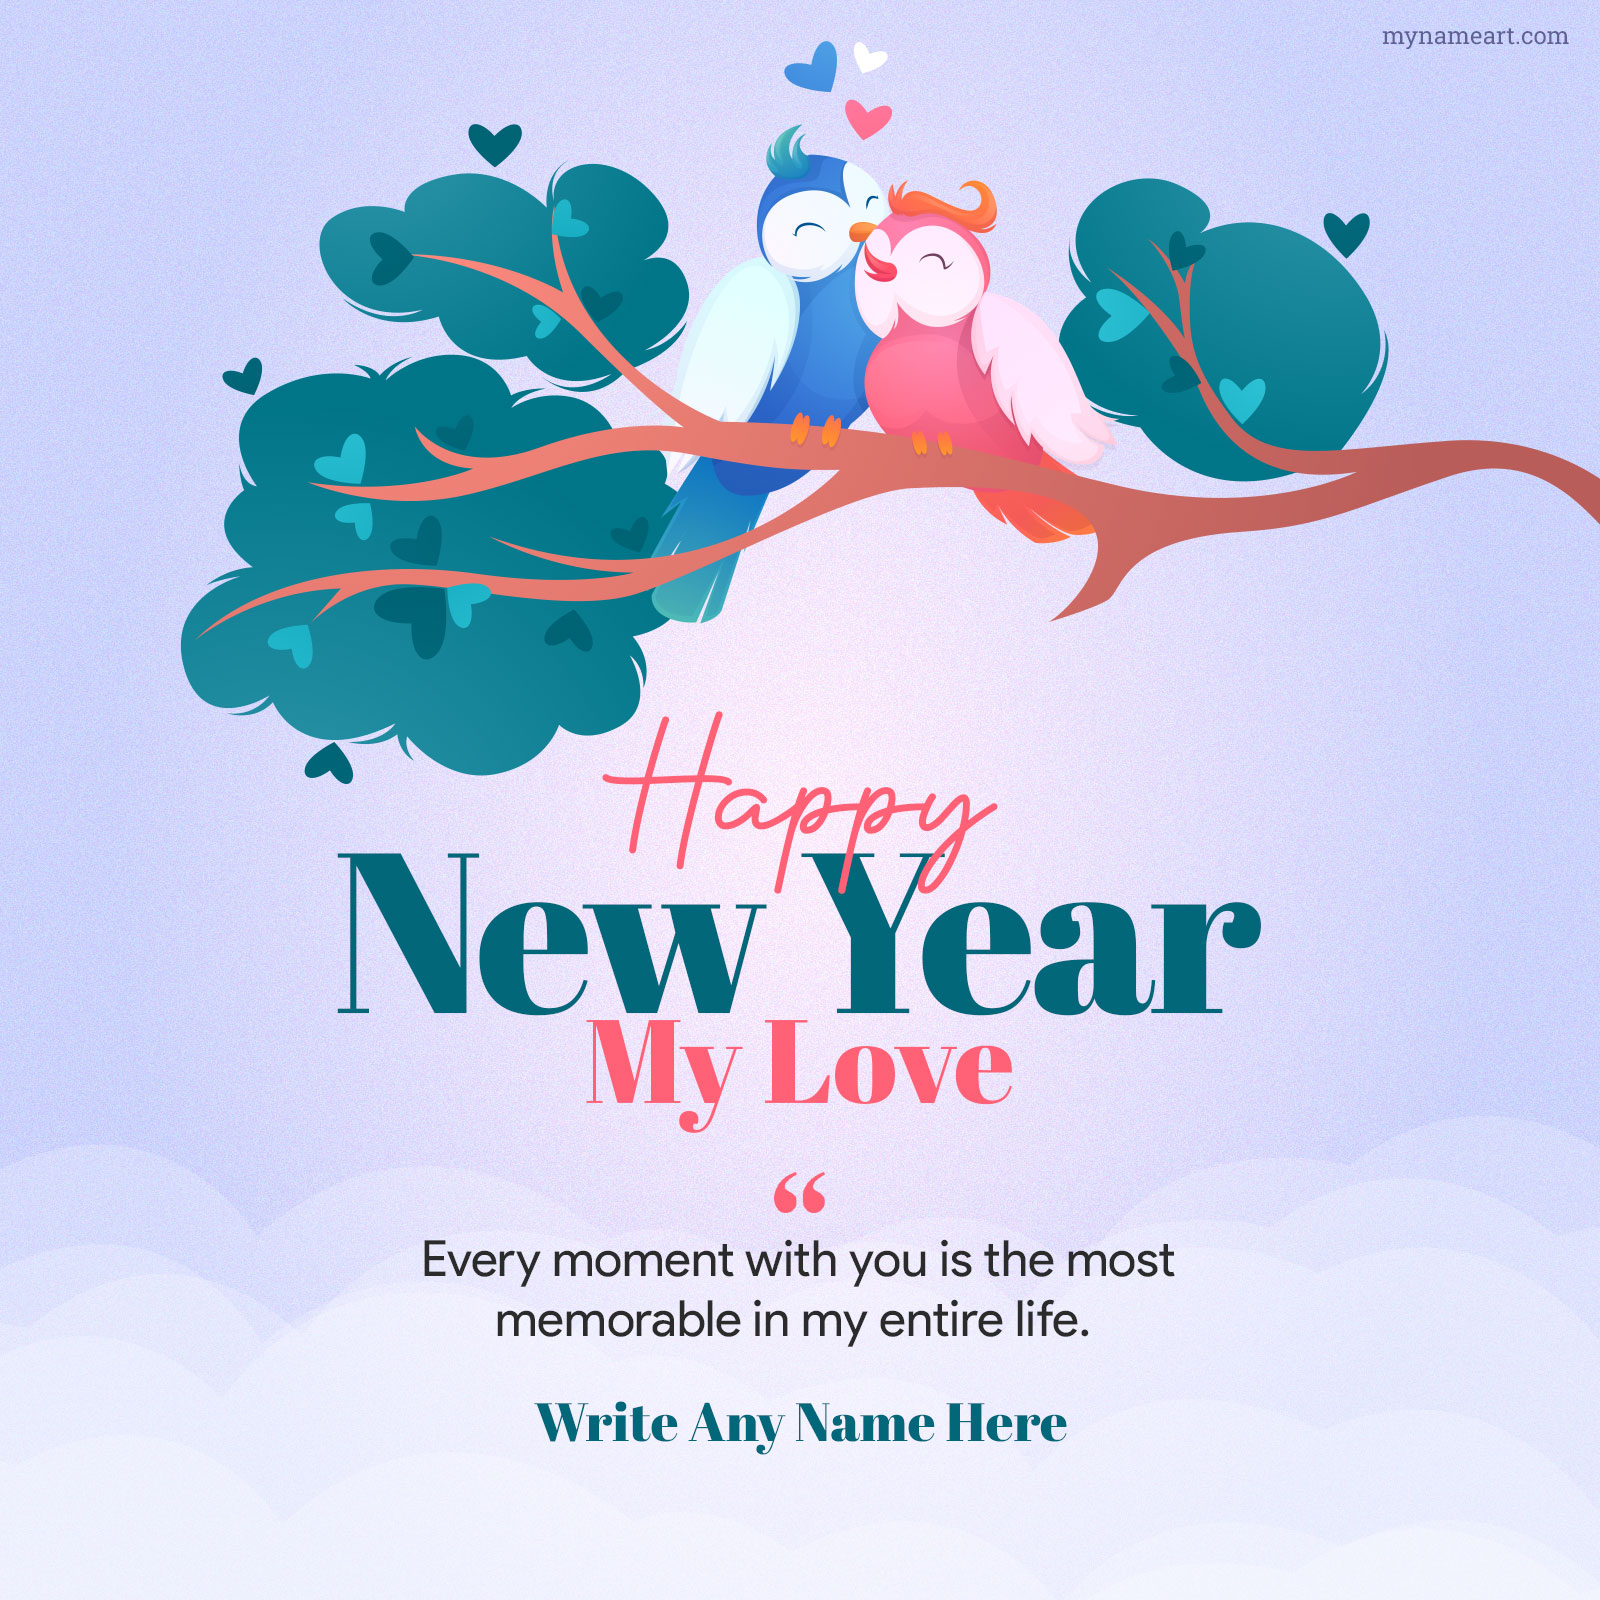 Happy New Year Wishes For My Love